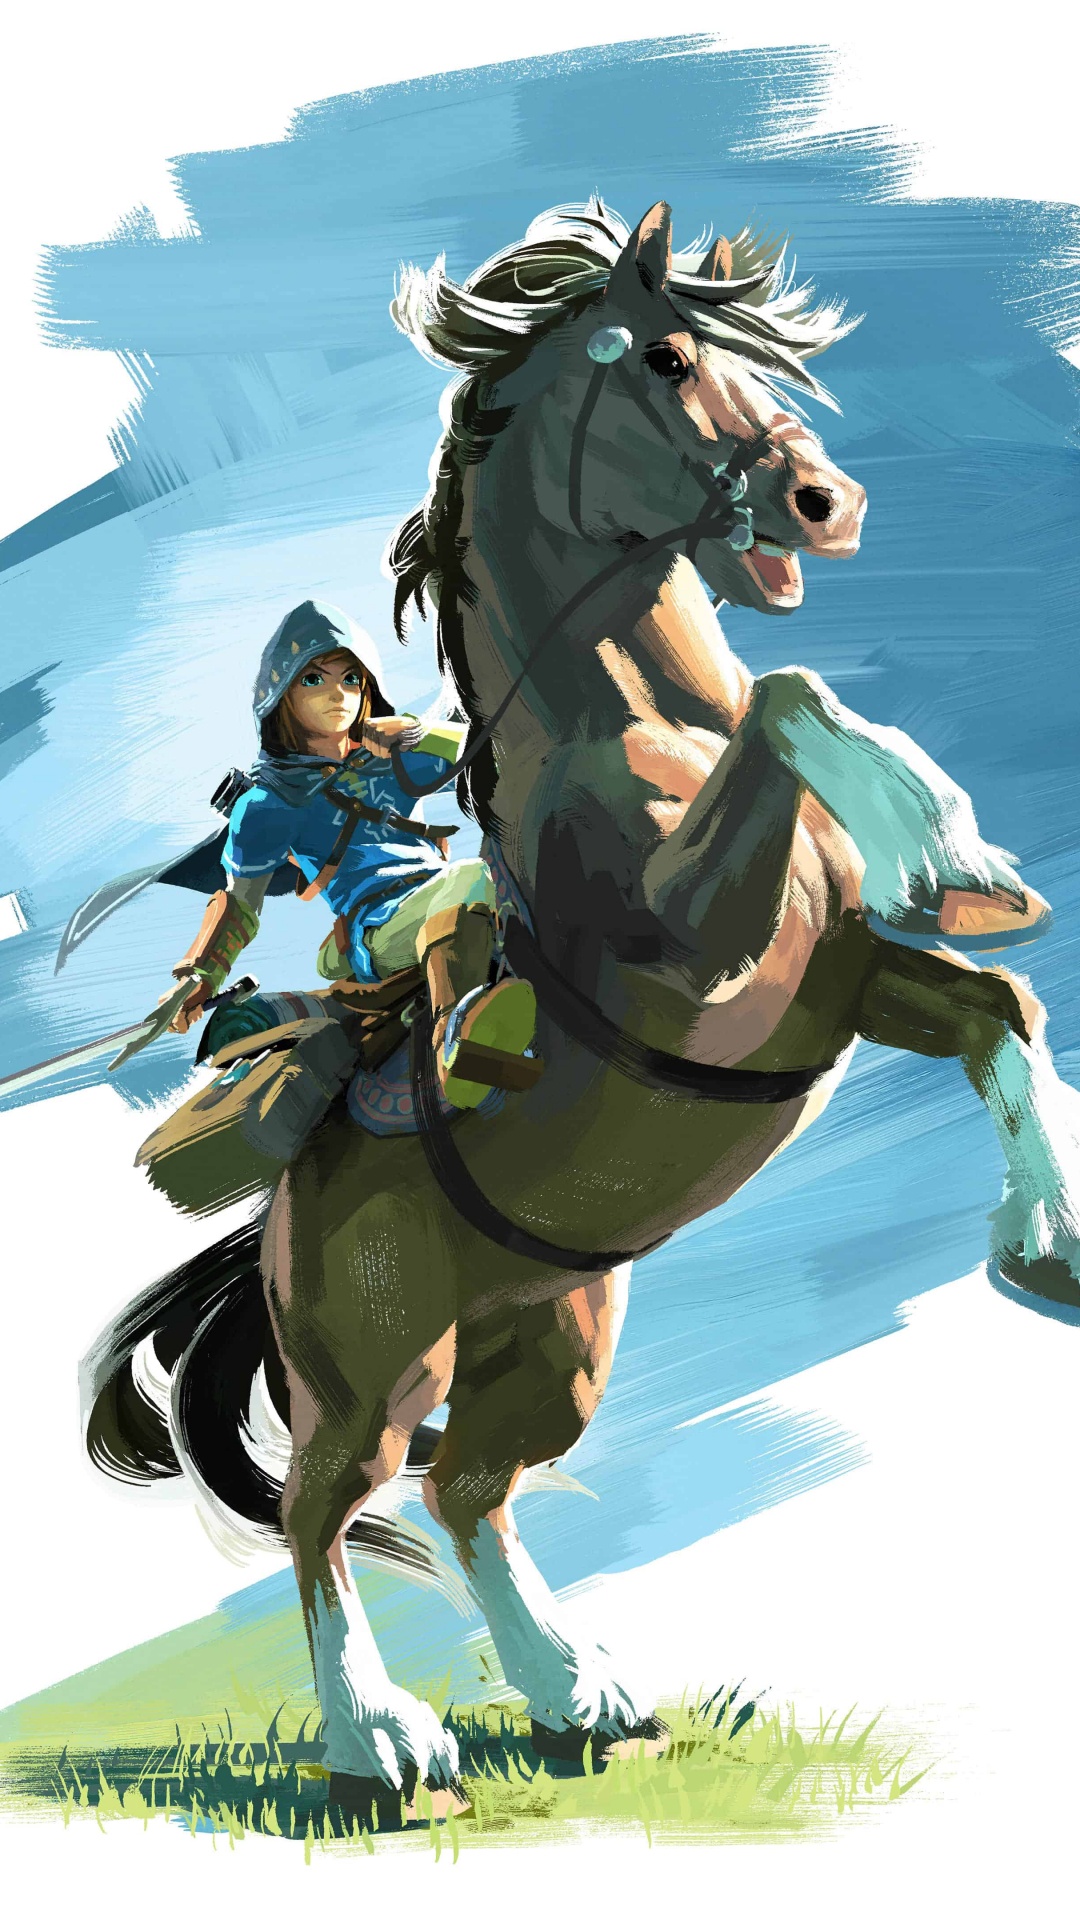 Woman in Blue Dress Riding White Horse Illustration. Wallpaper in 1080x1920 Resolution